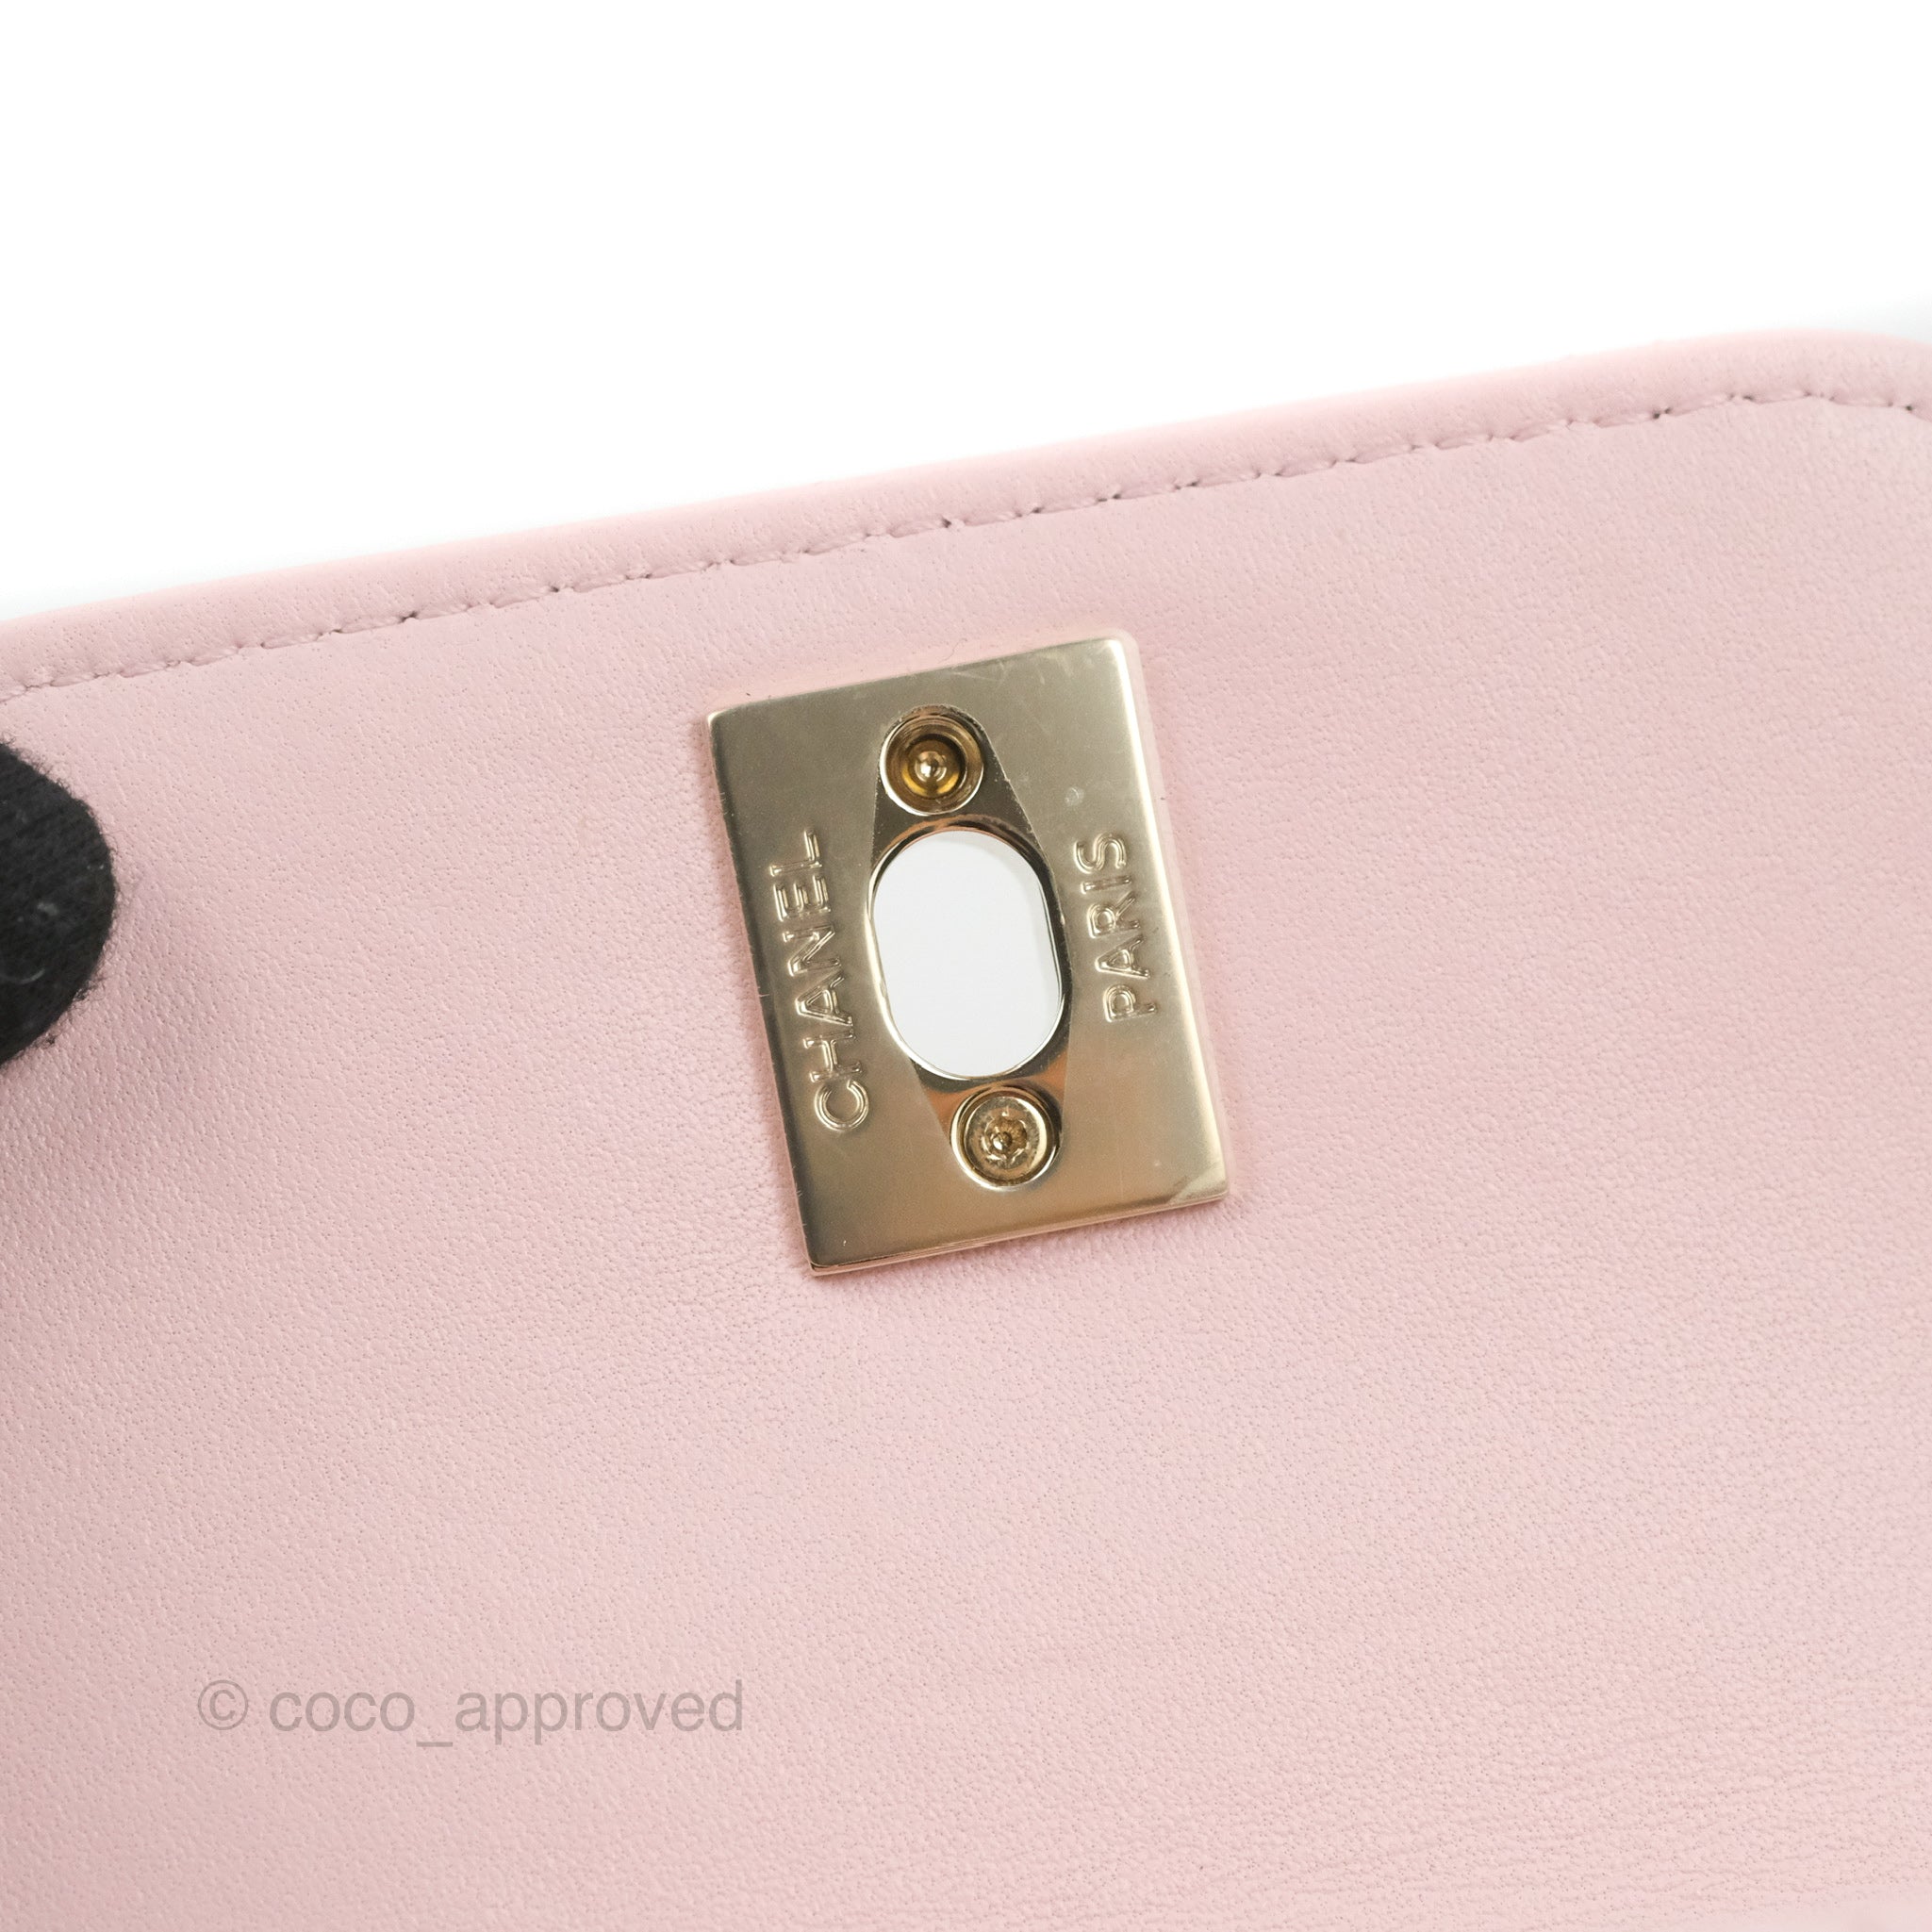 Burberry Check And Leather Card Case Ash Rose/ Dusty Pink